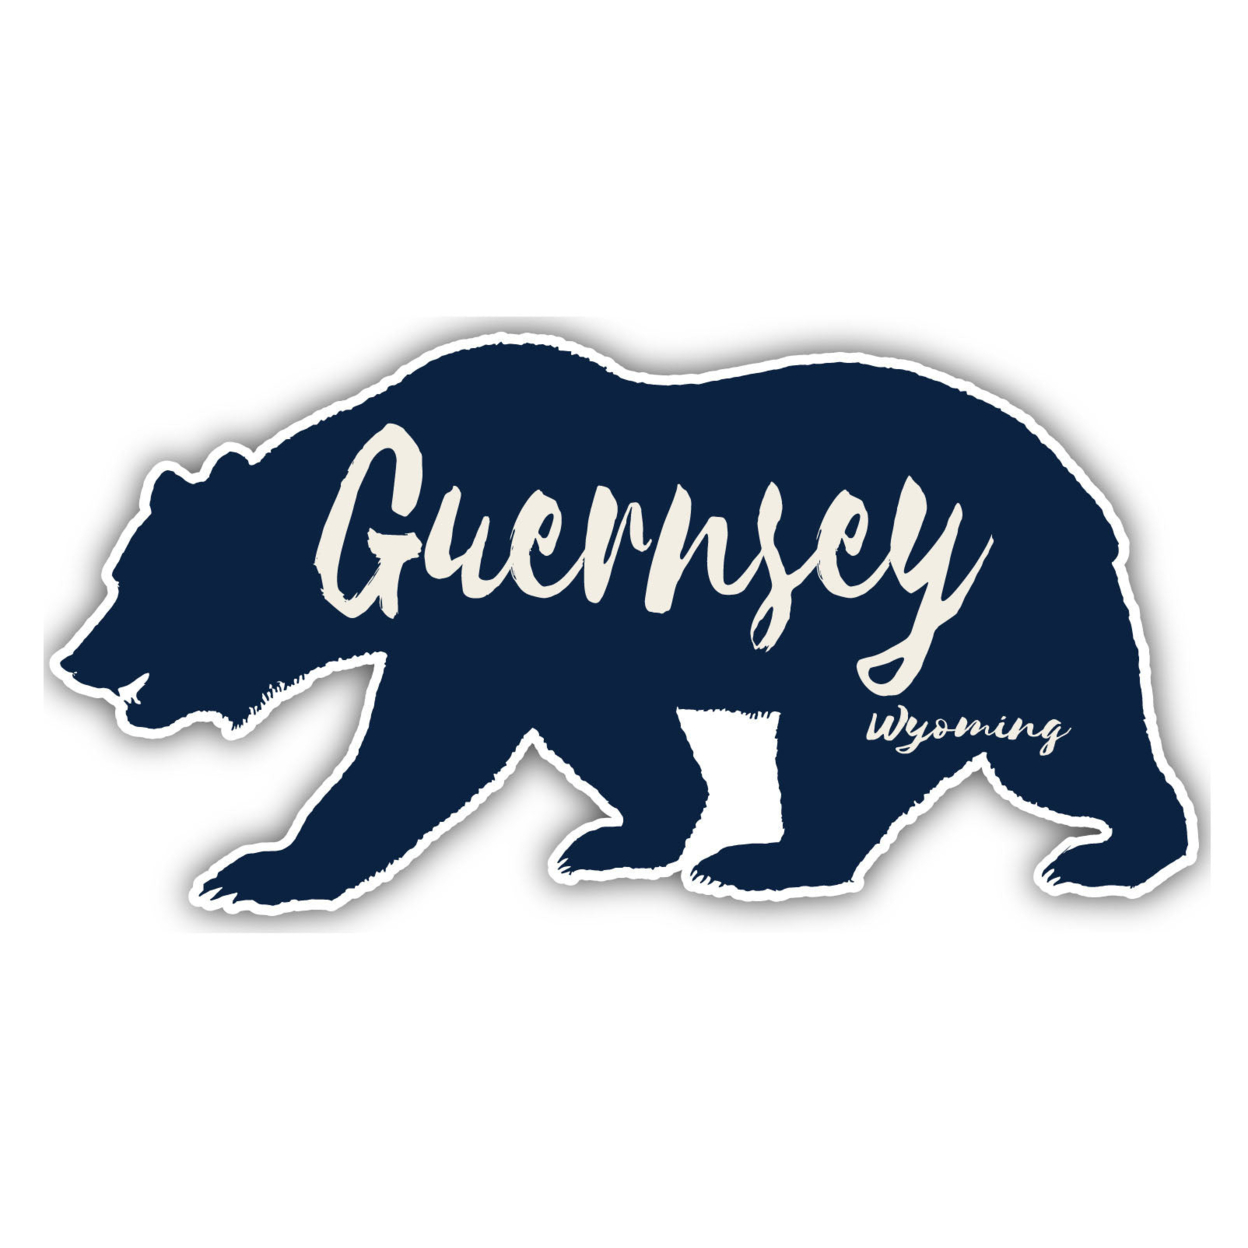 Guernsey Wyoming Souvenir Decorative Stickers (Choose Theme And Size) - 4-Pack, 6-Inch, Bear